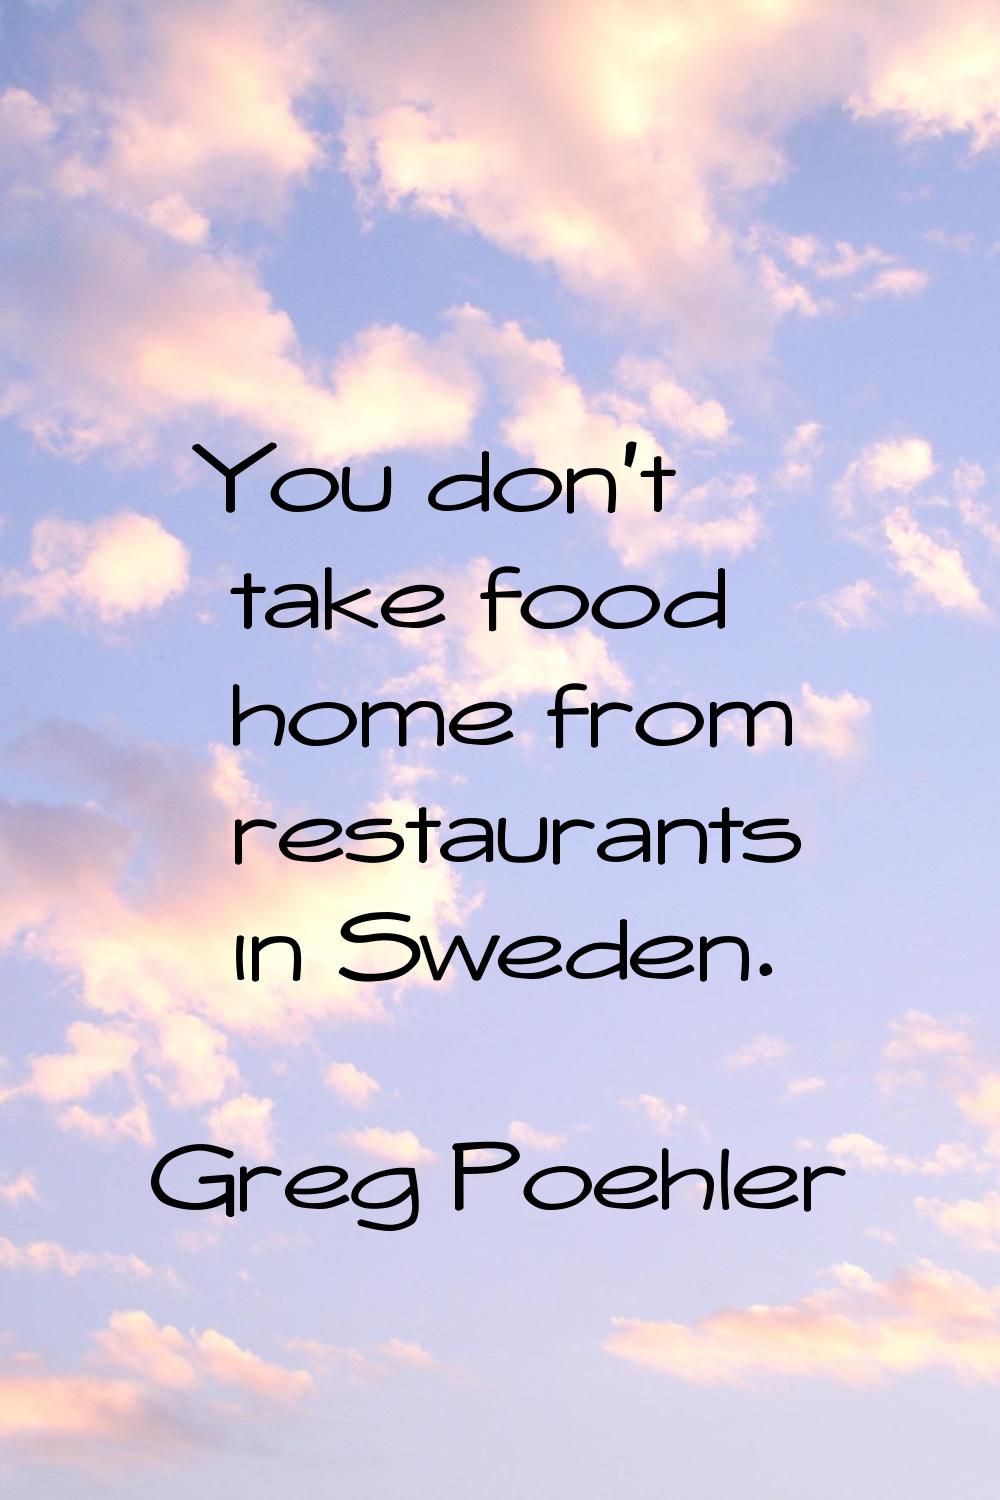 You don't take food home from restaurants in Sweden.